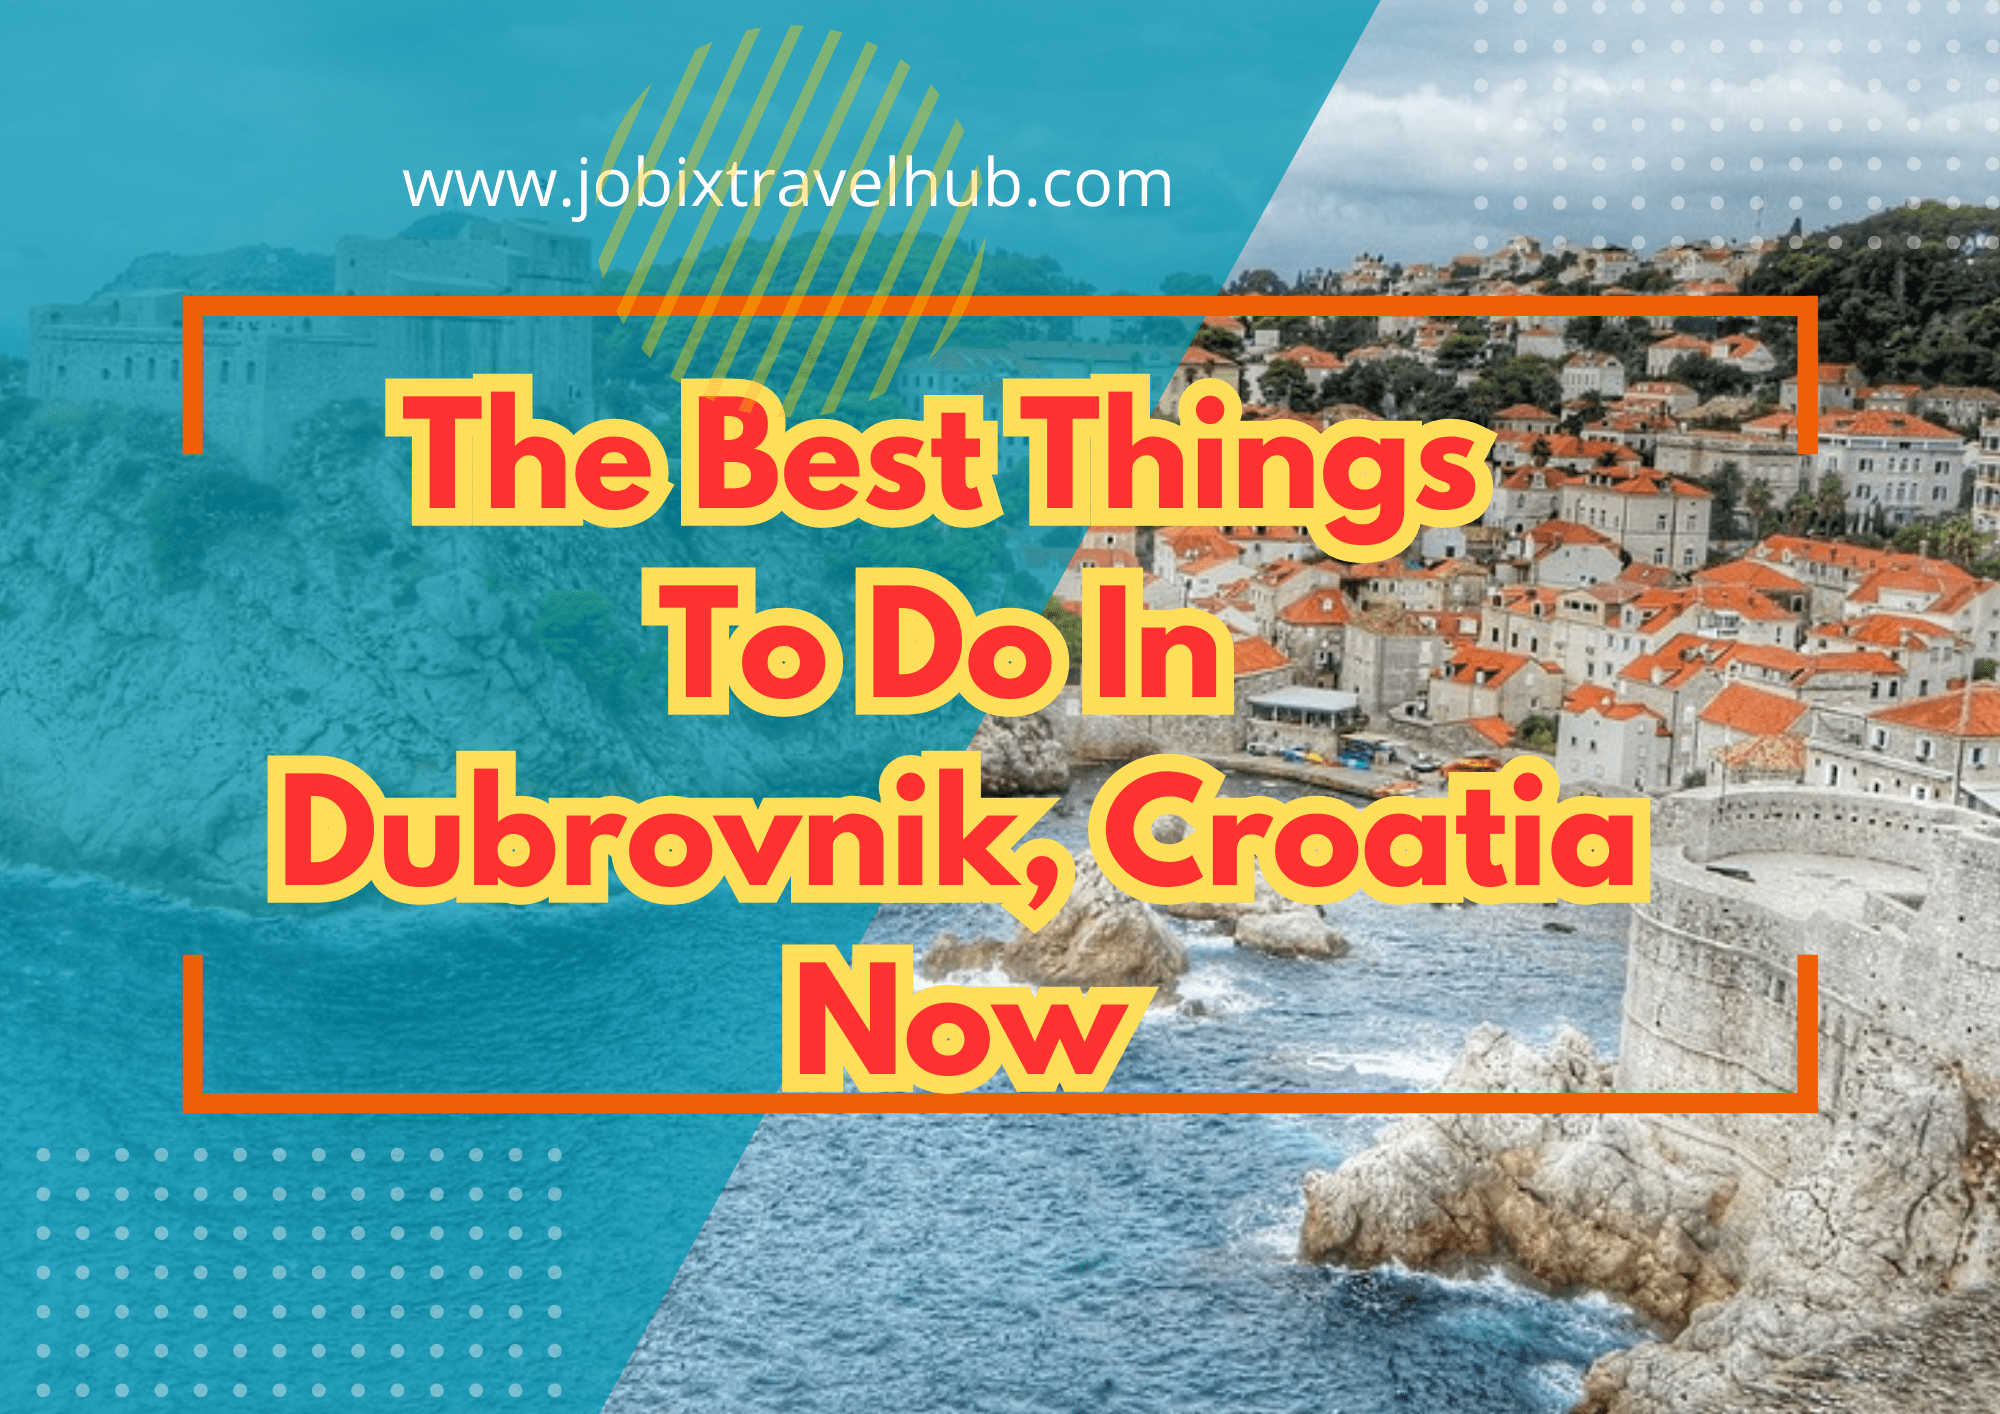 The Best Things To Do In Dubrovnik, Croatia Now